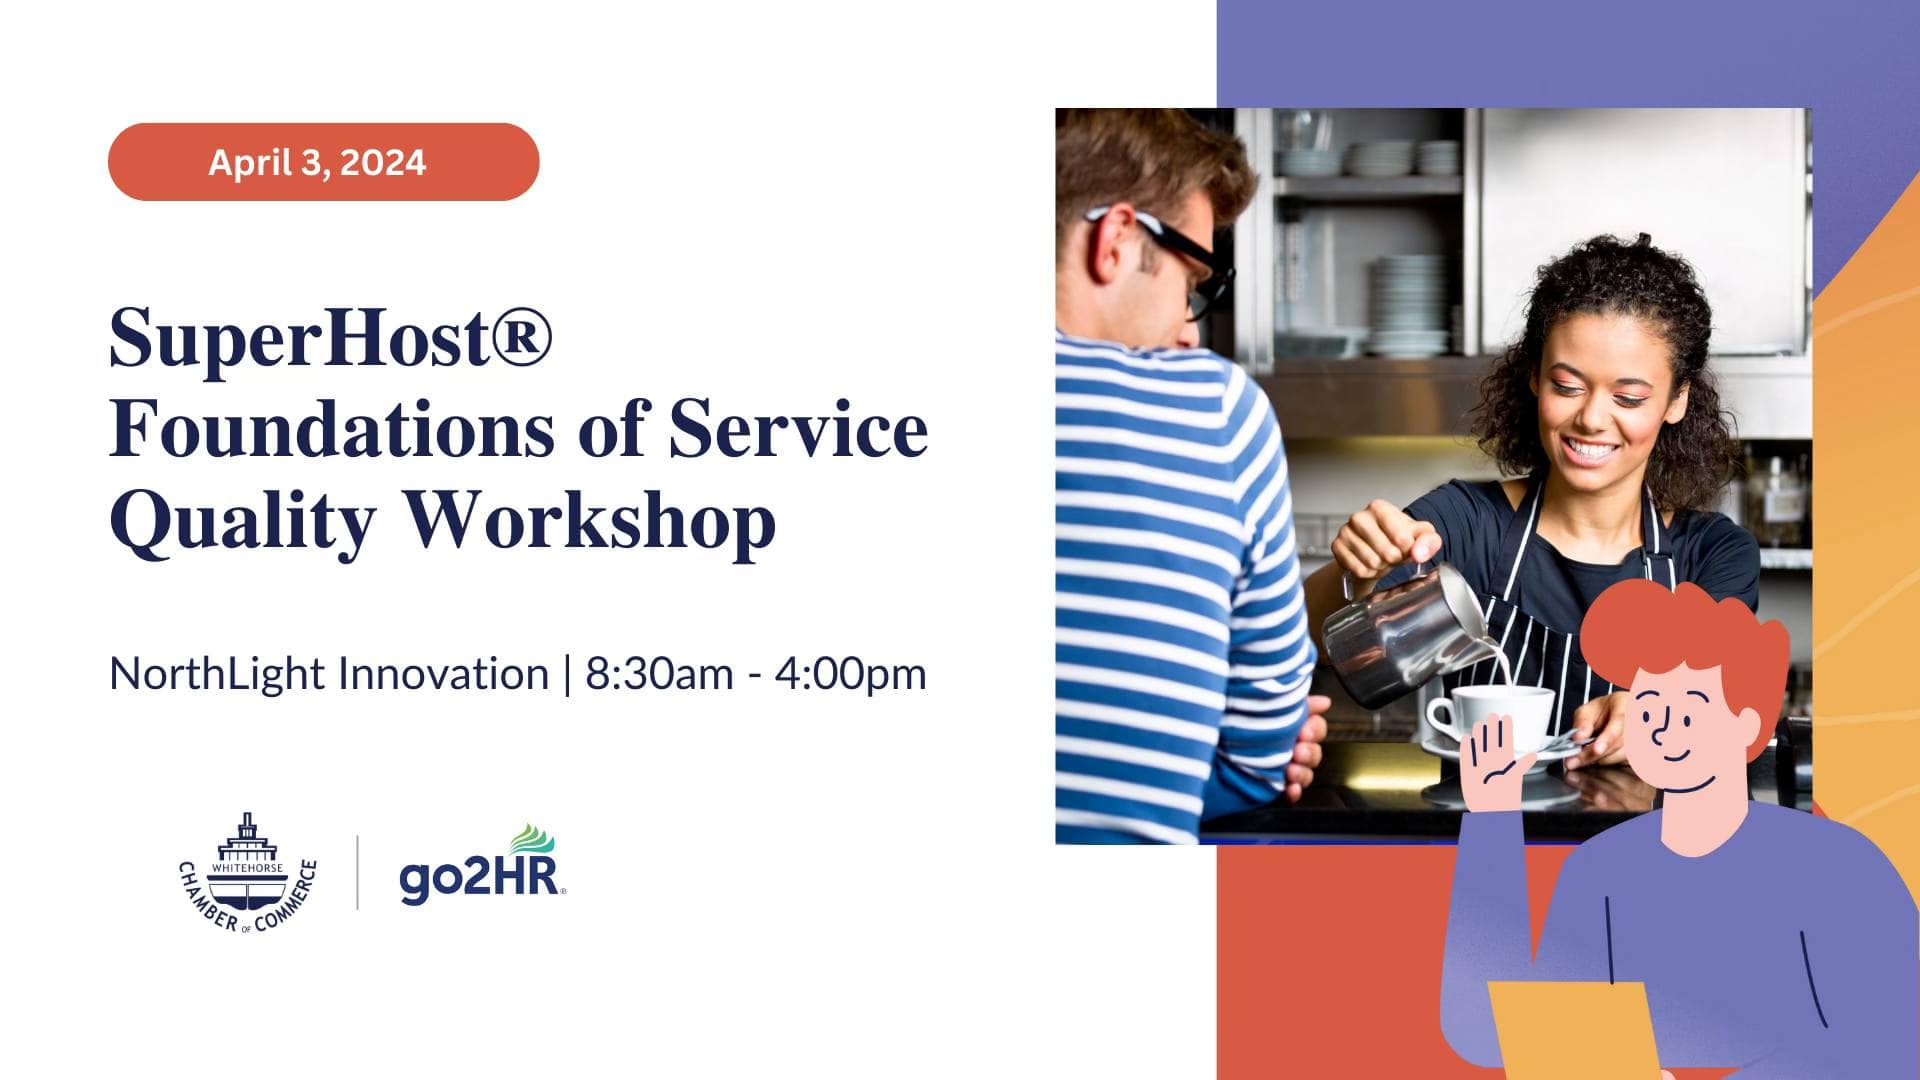 SuperHost® Foundations of Service Quality Workshop